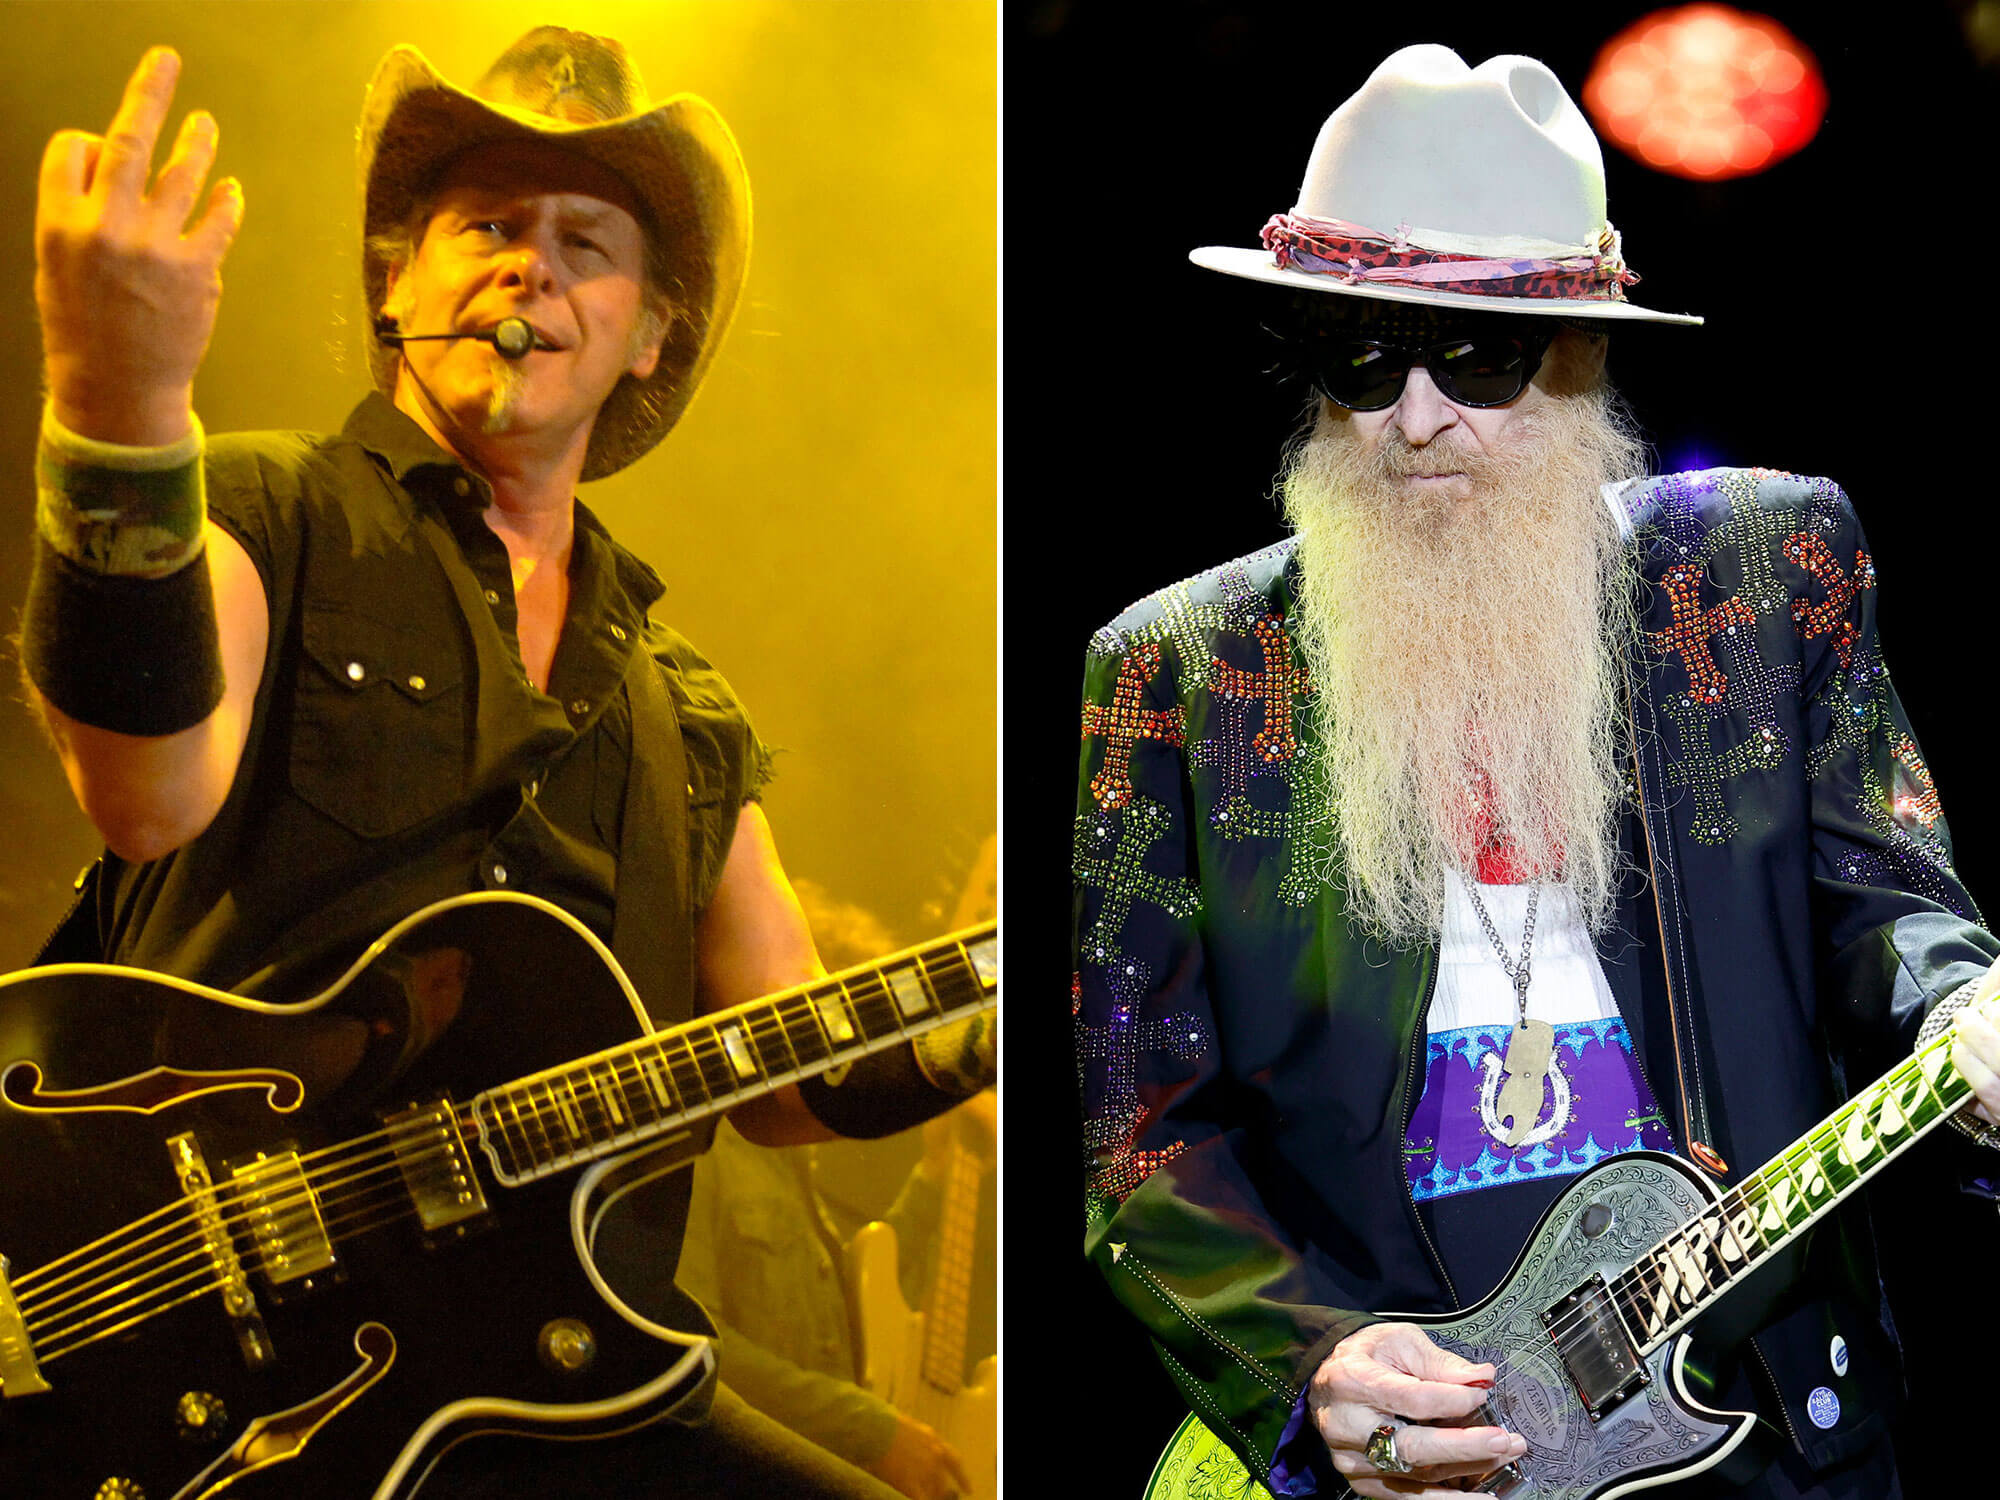 [L-R] Ted Nugent and Billy Gibbons